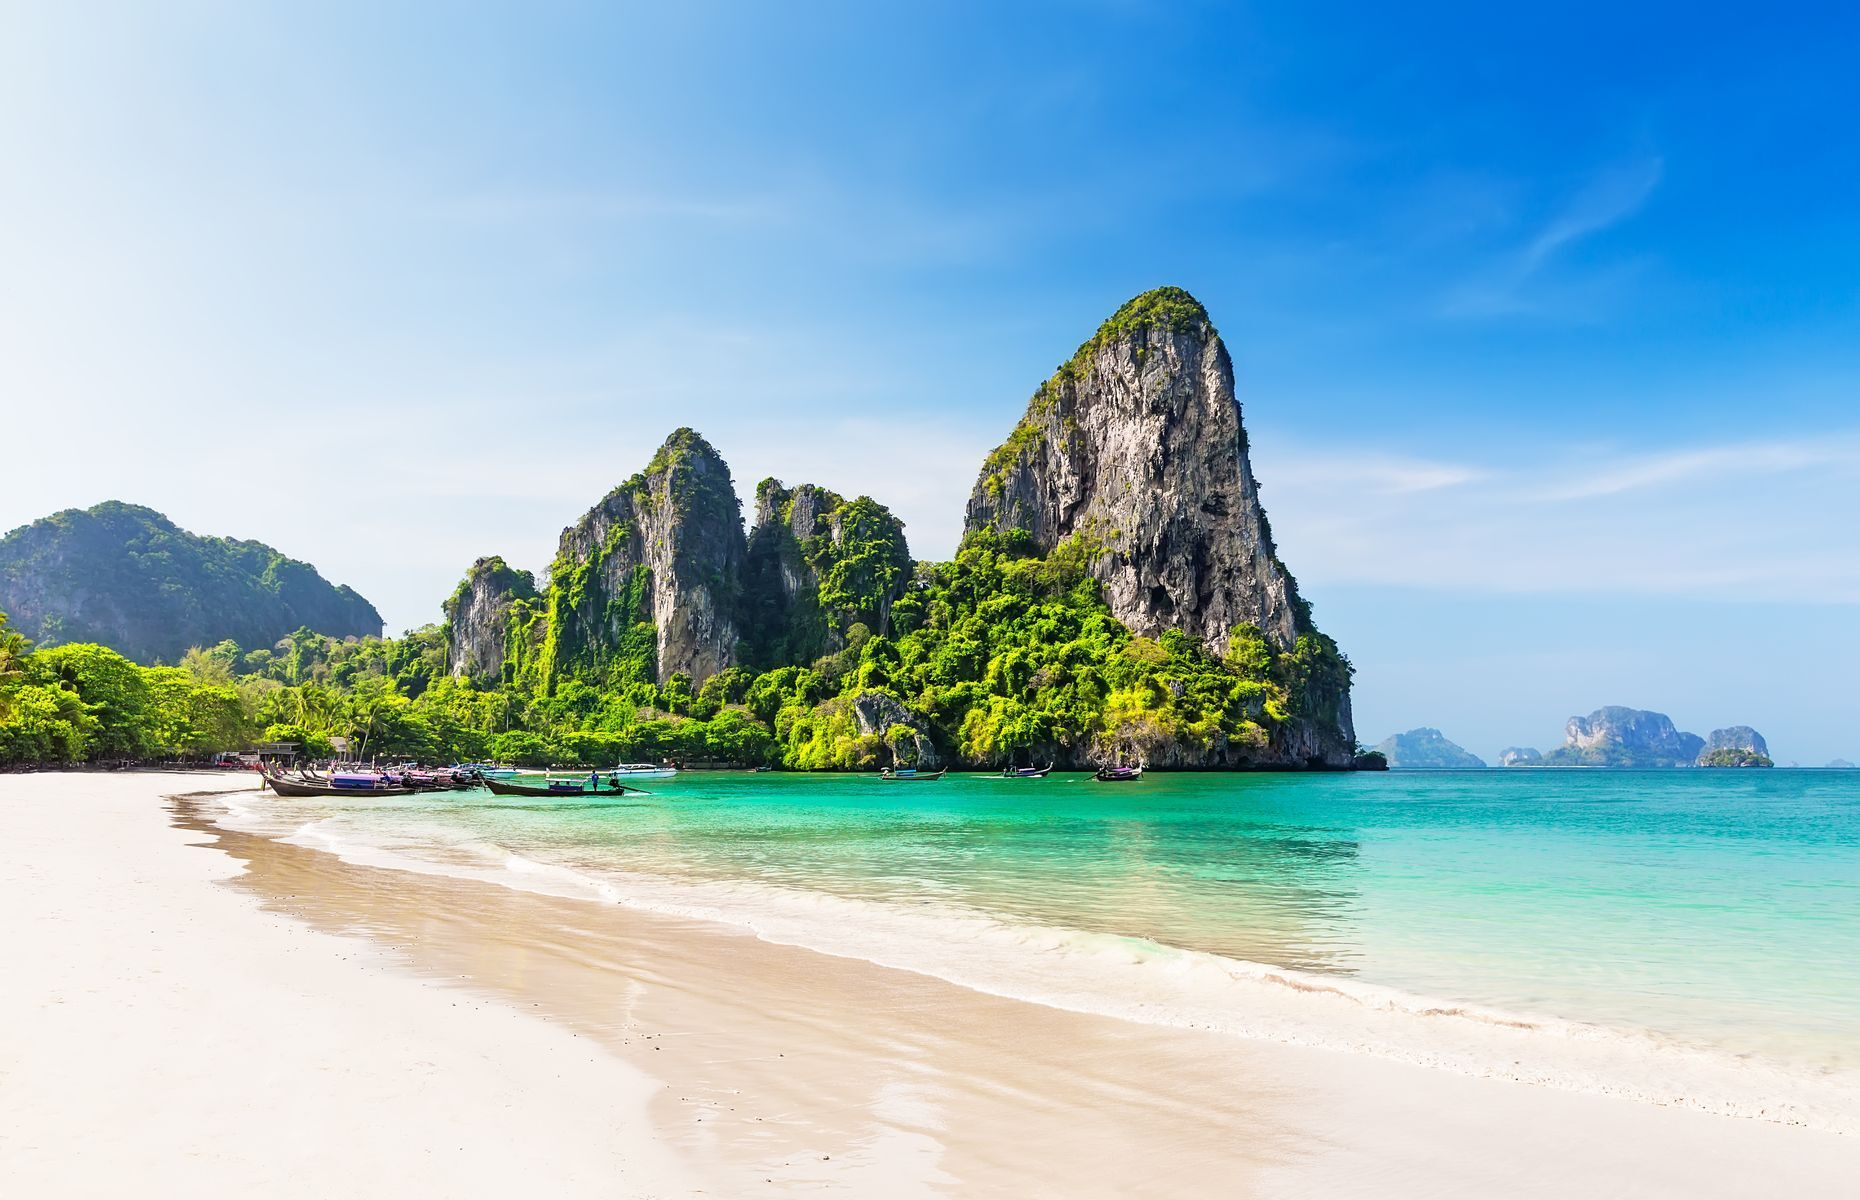 Located in southern Thailand’s <a href="https://www.tourismthailand.org/Destinations/Provinces/Krabi/344" rel="noreferrer noopener">Krabi province</a>, <a href="https://www.weseektravel.com/phra-nang-beach/" rel="noreferrer noopener">Railay</a> Beach is a tropical paradise nestled between limestone cliffs on the Andaman Sea. Its fine sand and clear waters offer exceptional opportunities for swimming and kayaking. Accessible by boat, the site includes Phra Nang, just off Railay Beach, and other explorable caves with imposing stalactites.